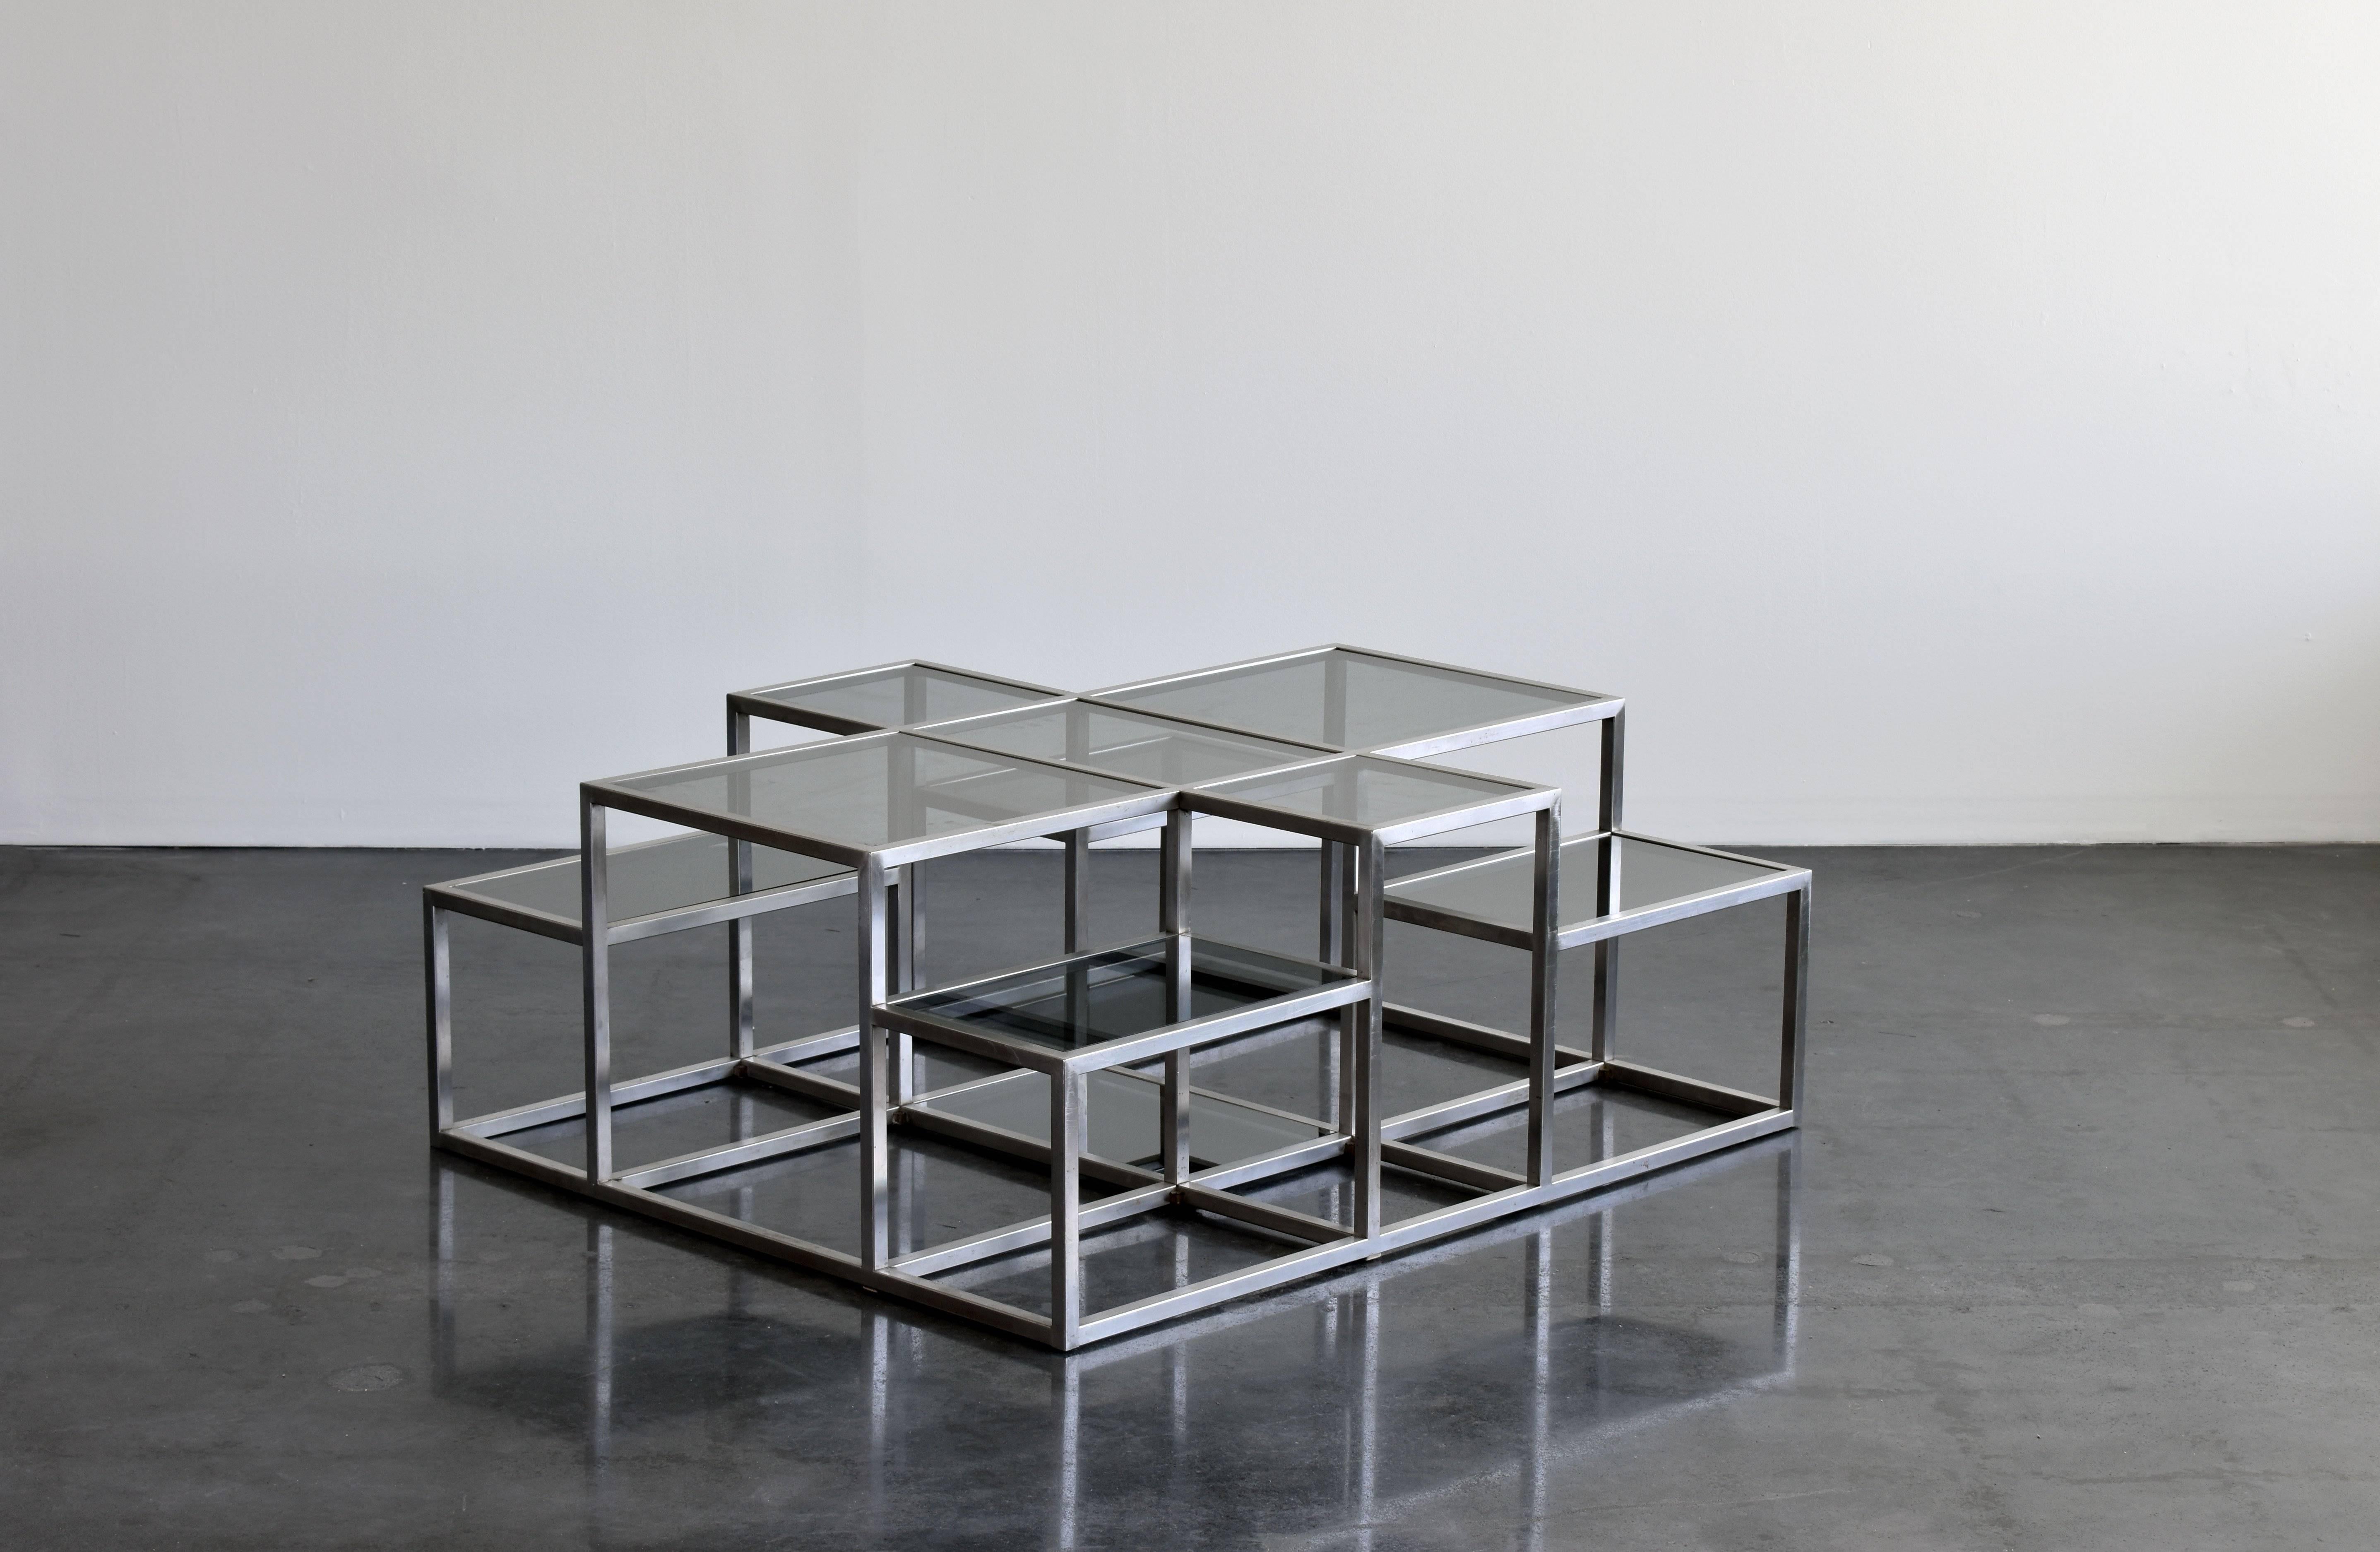 A large sculptural, minimalist coffee table by Michel Boyer in stainless steel with smoked glass plates. The form bears similarity to minimalist works, such as those by Sol Lewitt. 

Michel Boyer is one of many important designers working in metal.